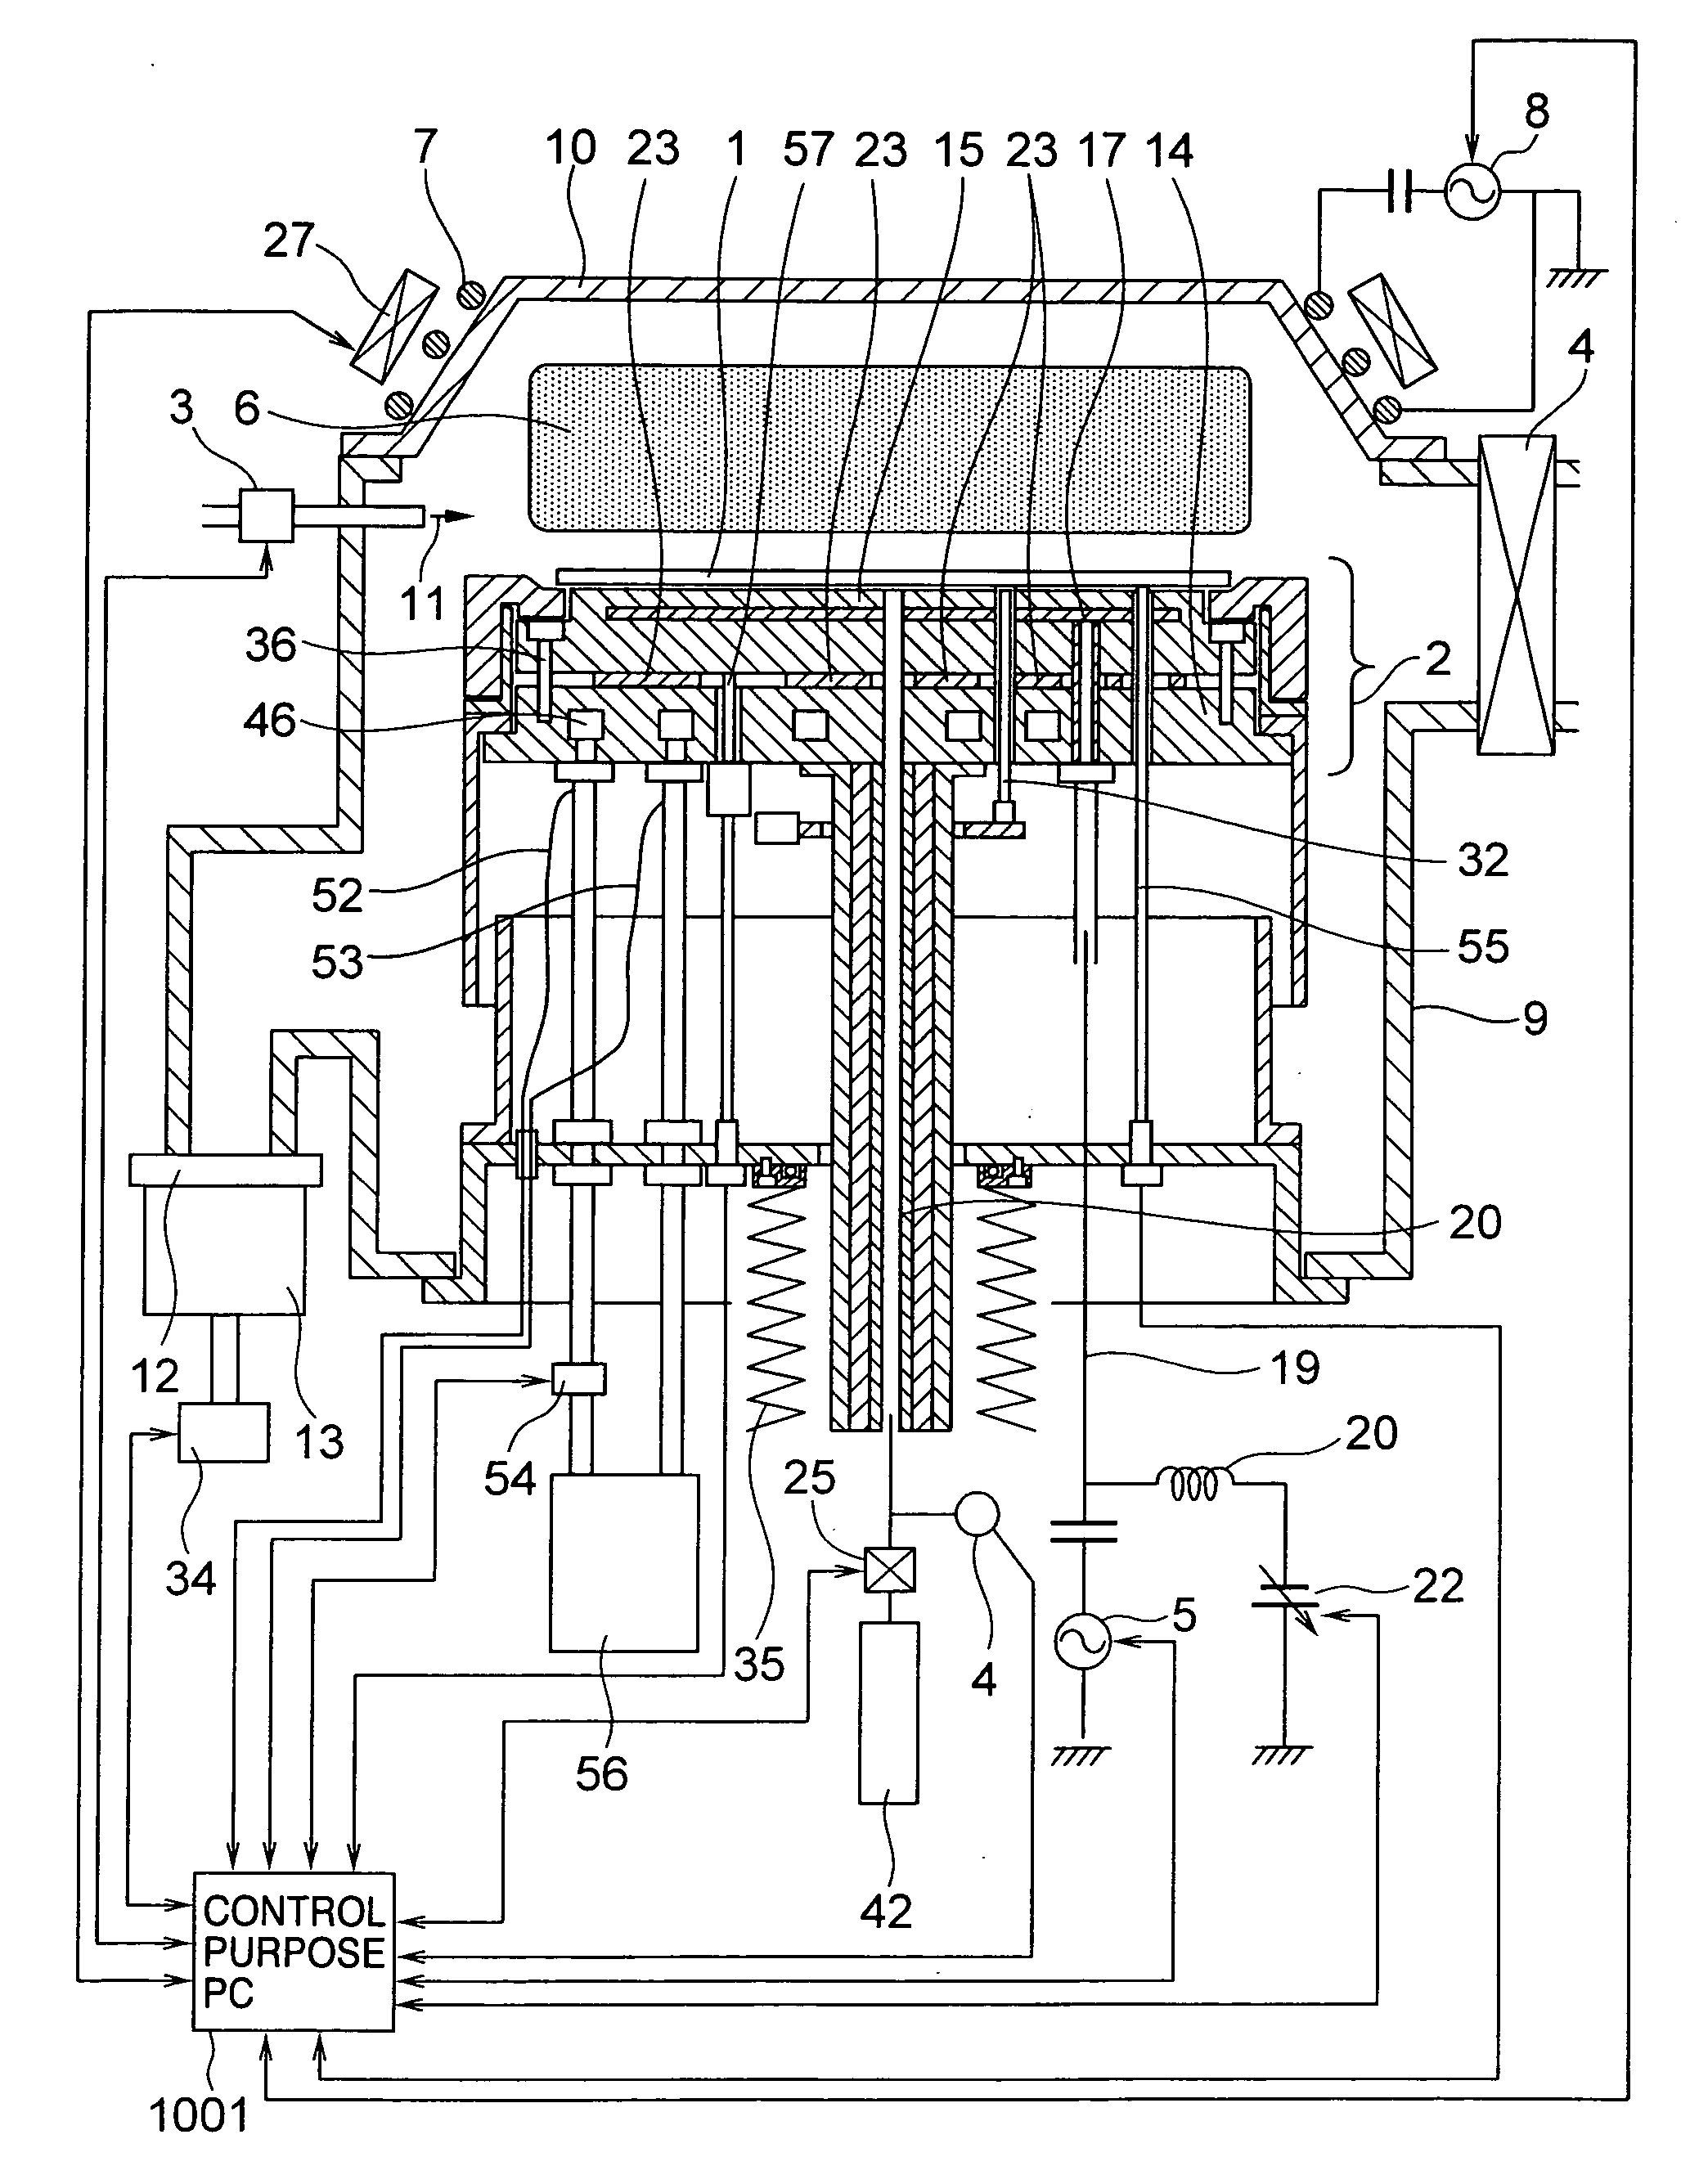 Wafer processing apparatus capable of controlling wafer temperature